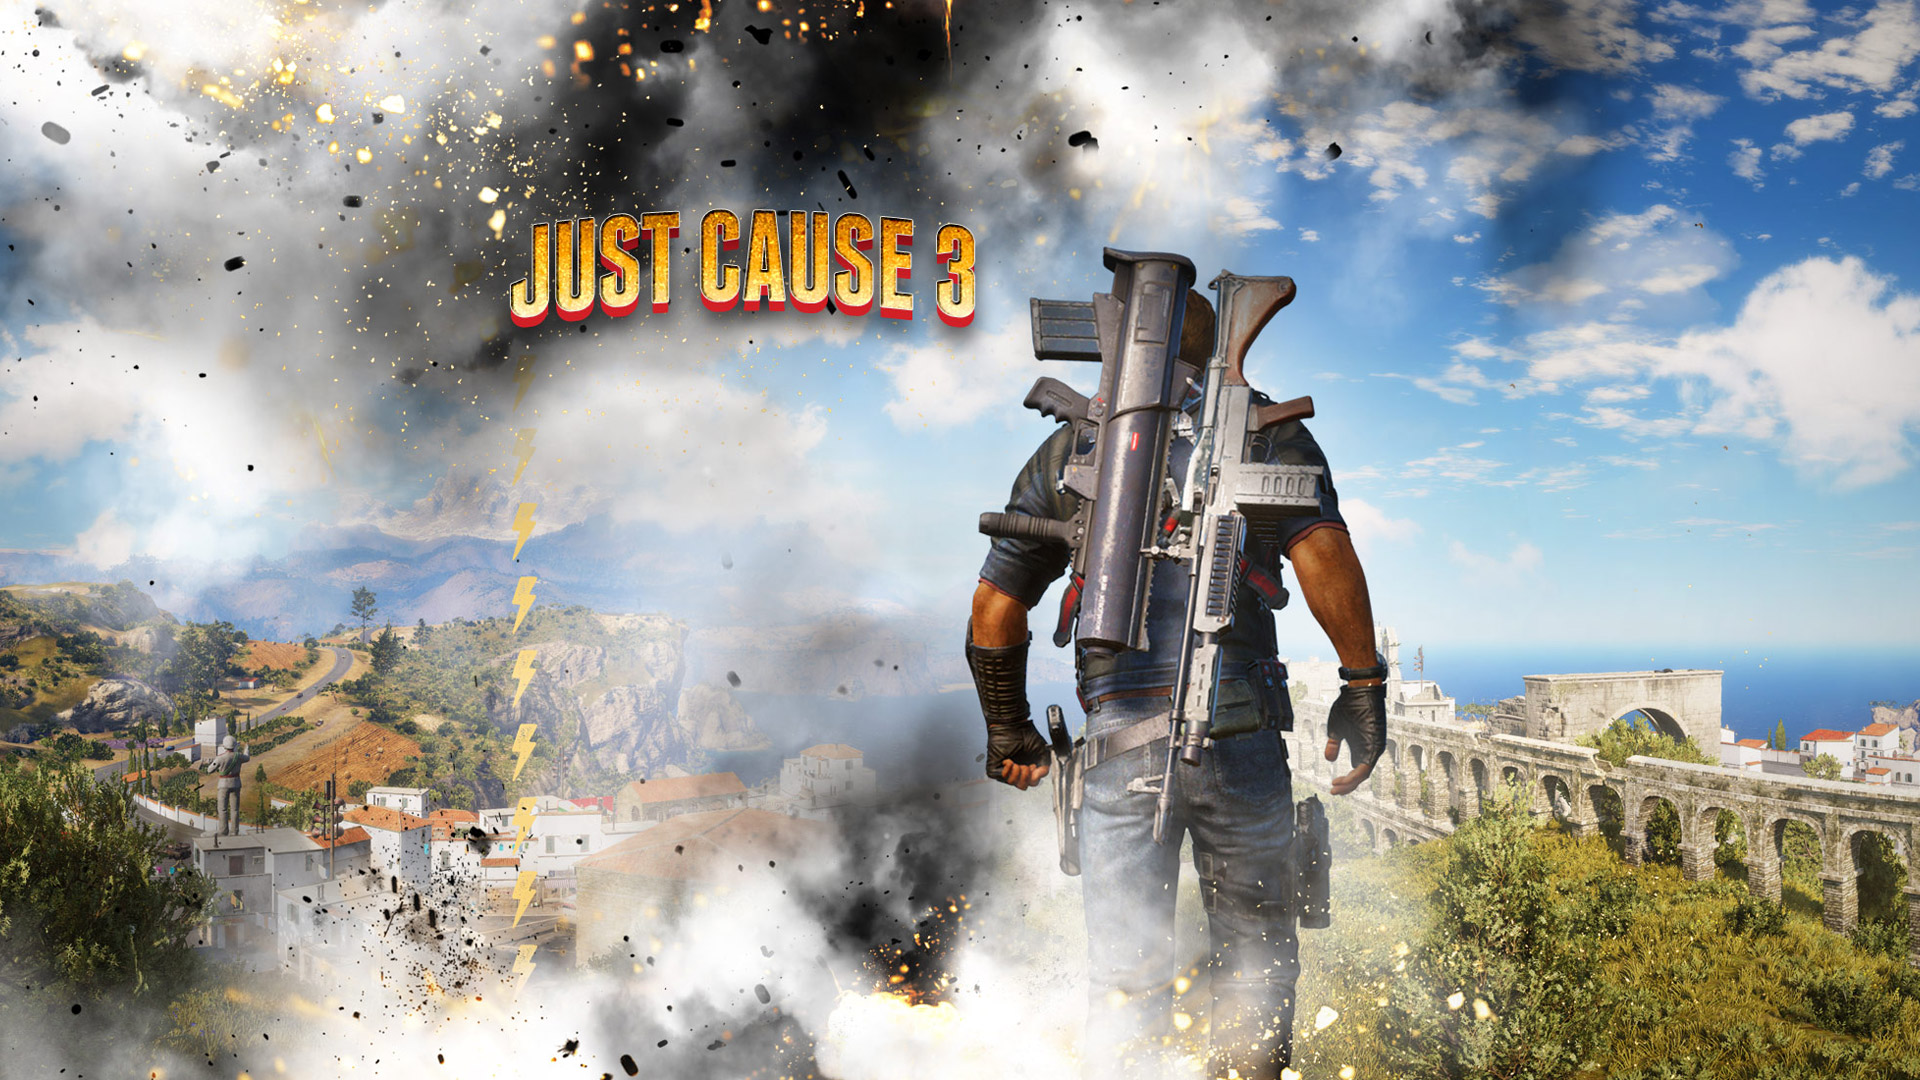 Just Cause Wallpaper In